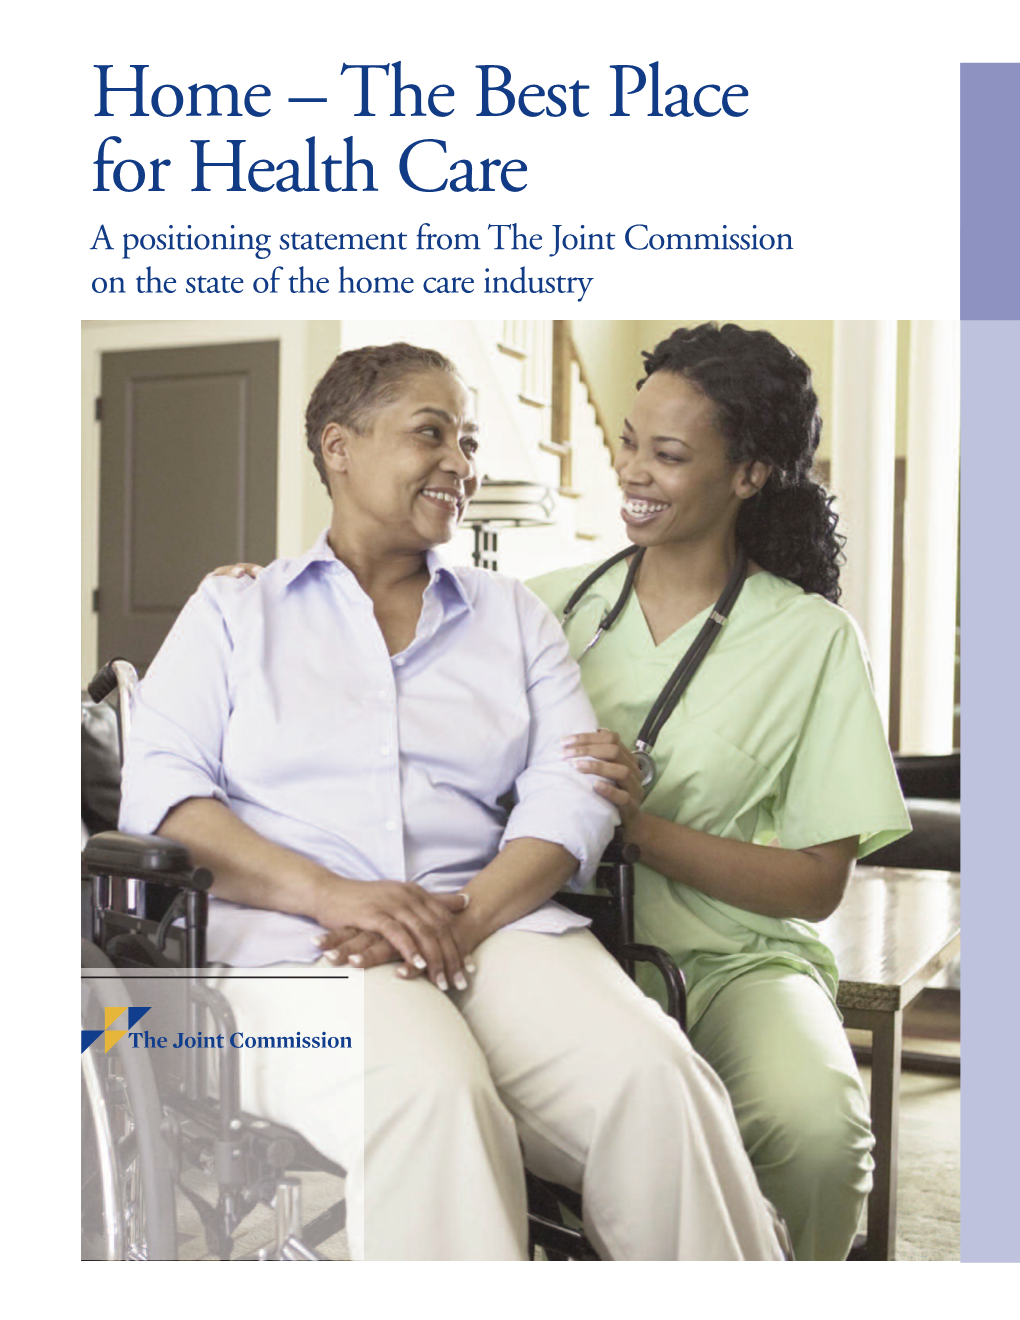 Home – the Best Place for Health Care a Positioning Statement from the Joint Commission on the State of the Home Care Industry Home – the Best Place for Health Care